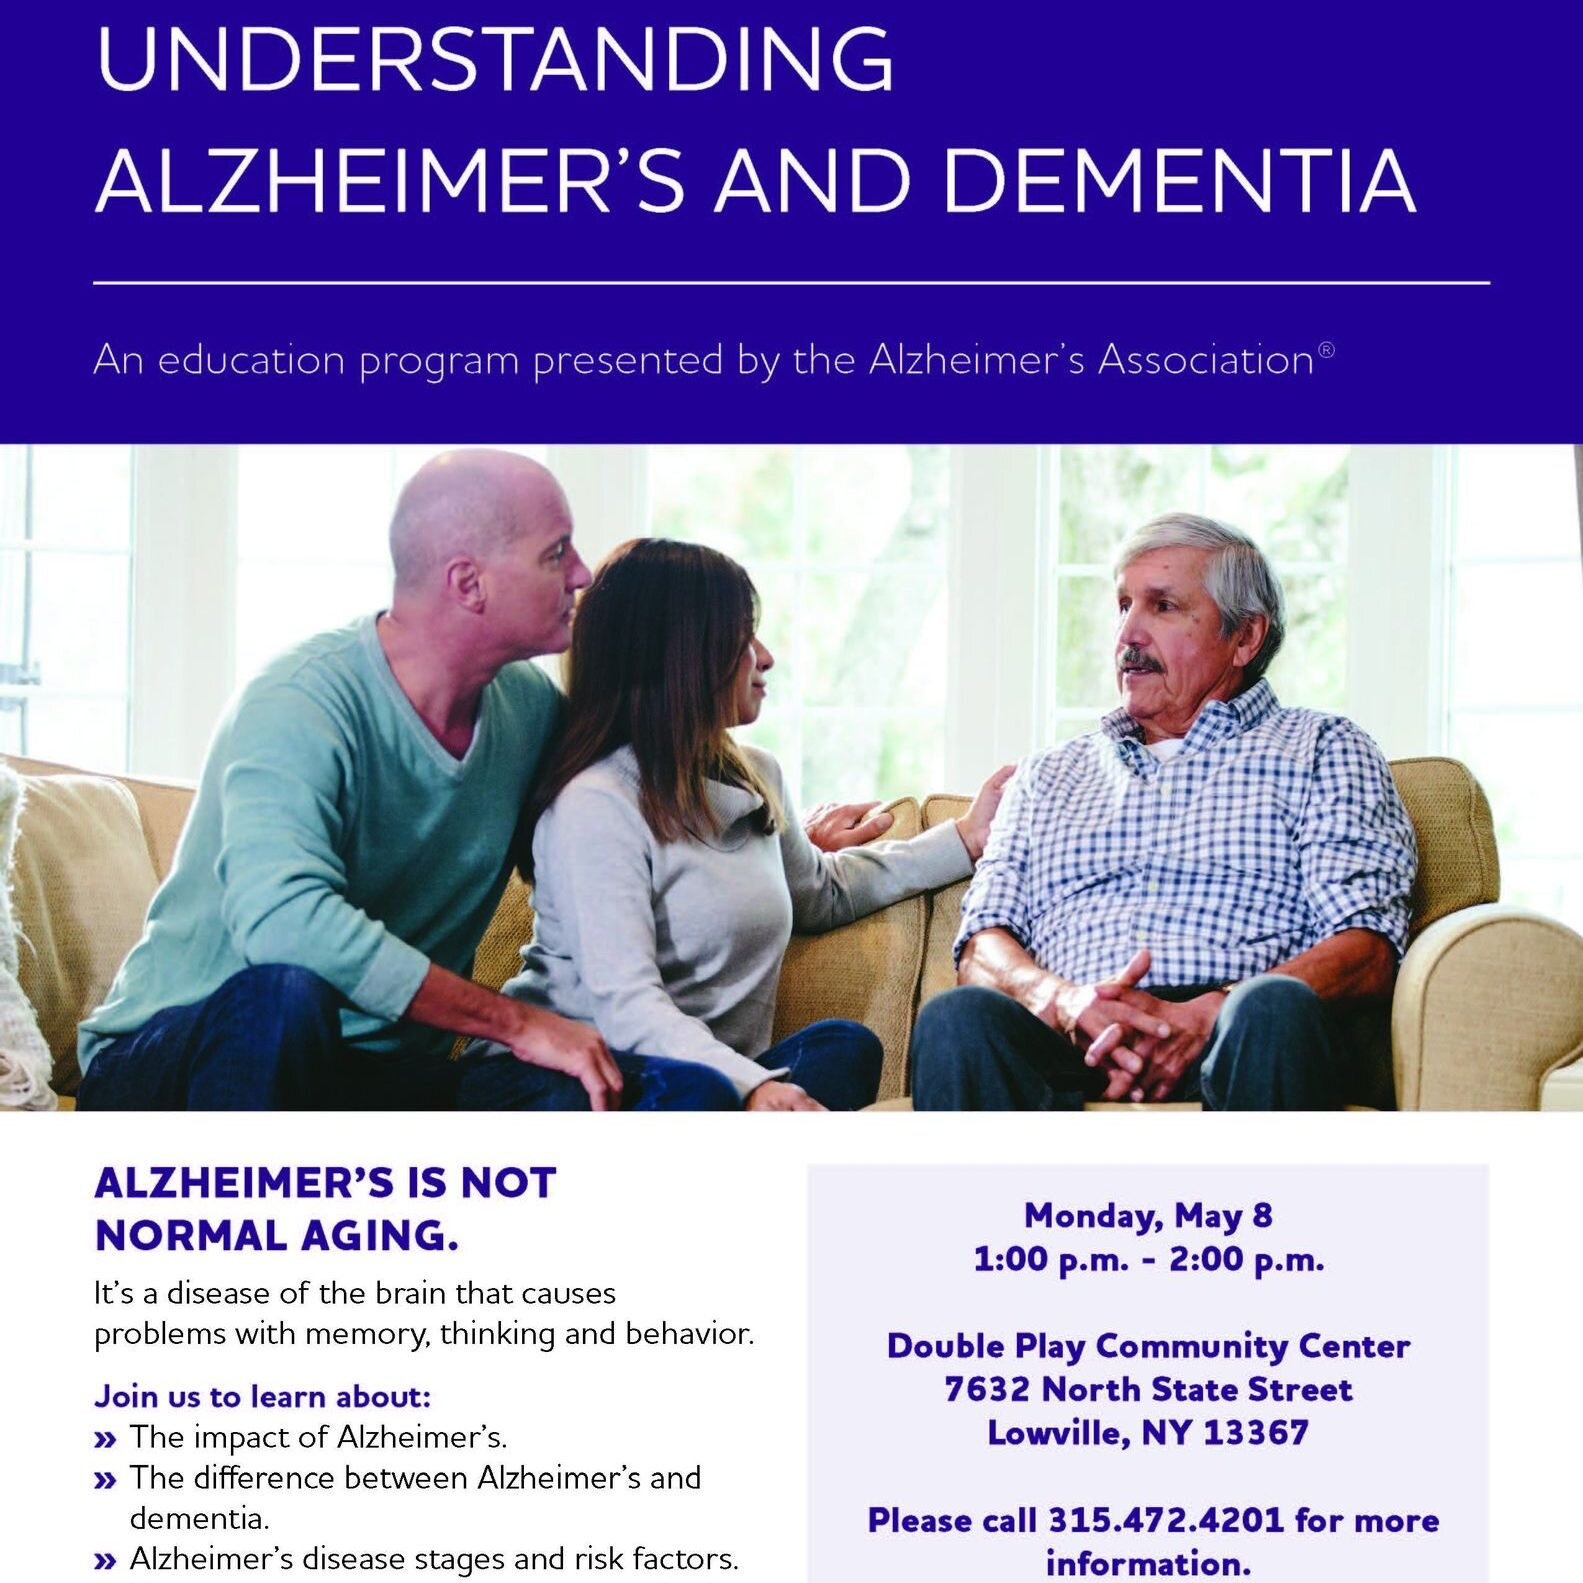 May 8th at the Double Play Senior Center, get information, resources and support with this free talk; Understanding Alzheimer's and Dementia.  Register for free online.  Link in profile.

#doubleplaycc @doubleplaycommunitycenter #alzheimers #dementia